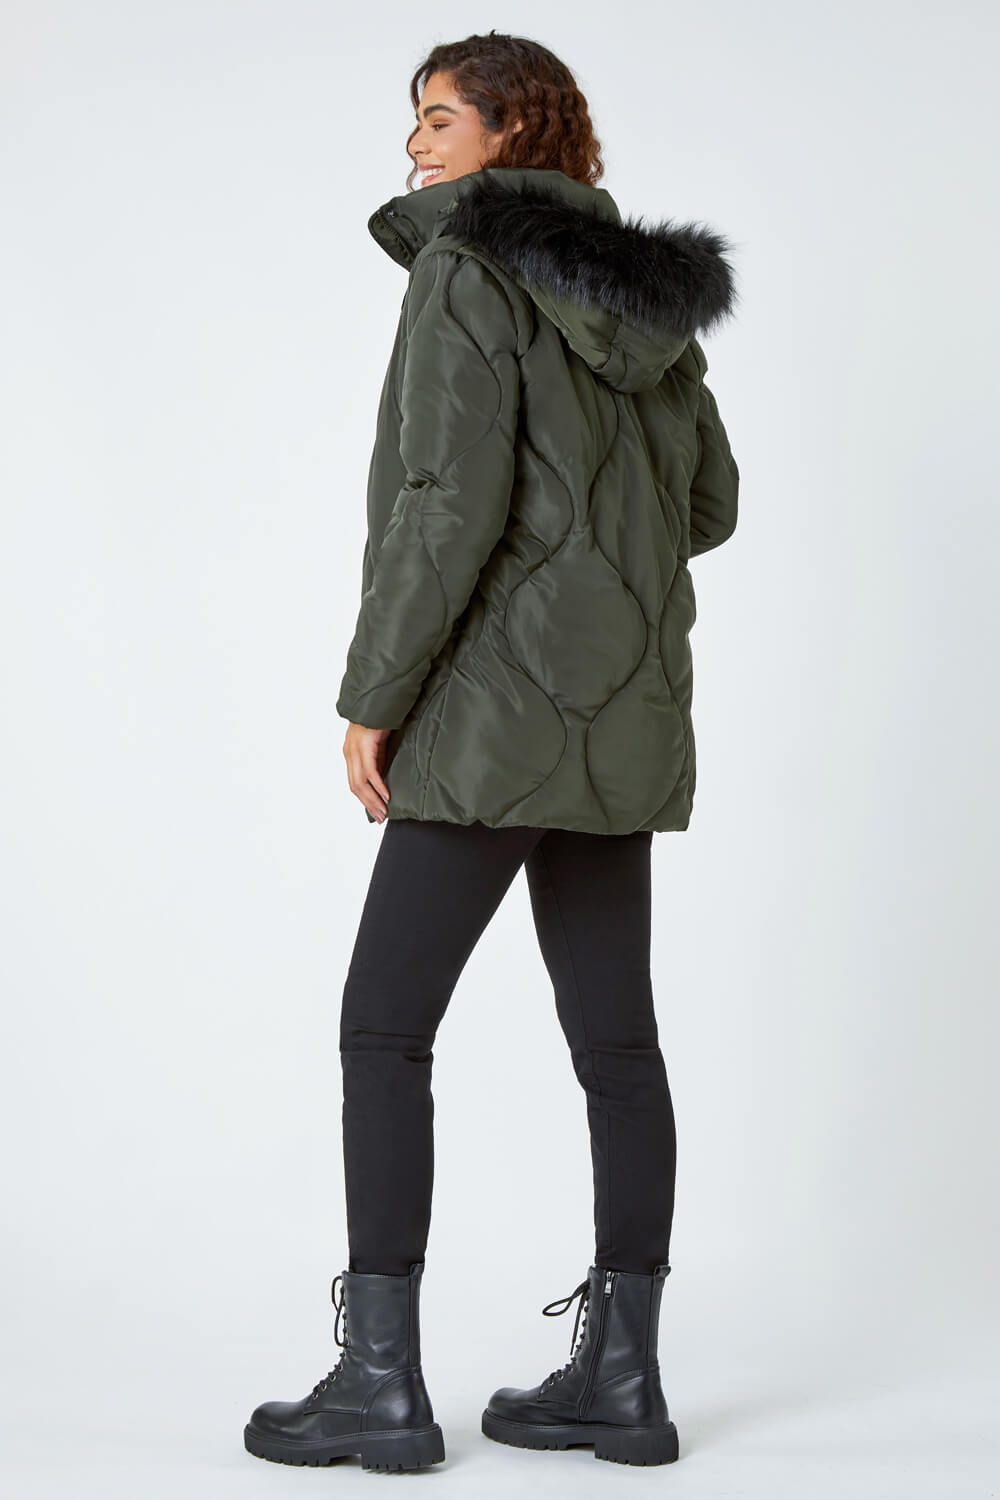 Dark Green Quilted Faux Fur Hooded Coat, Image 3 of 5